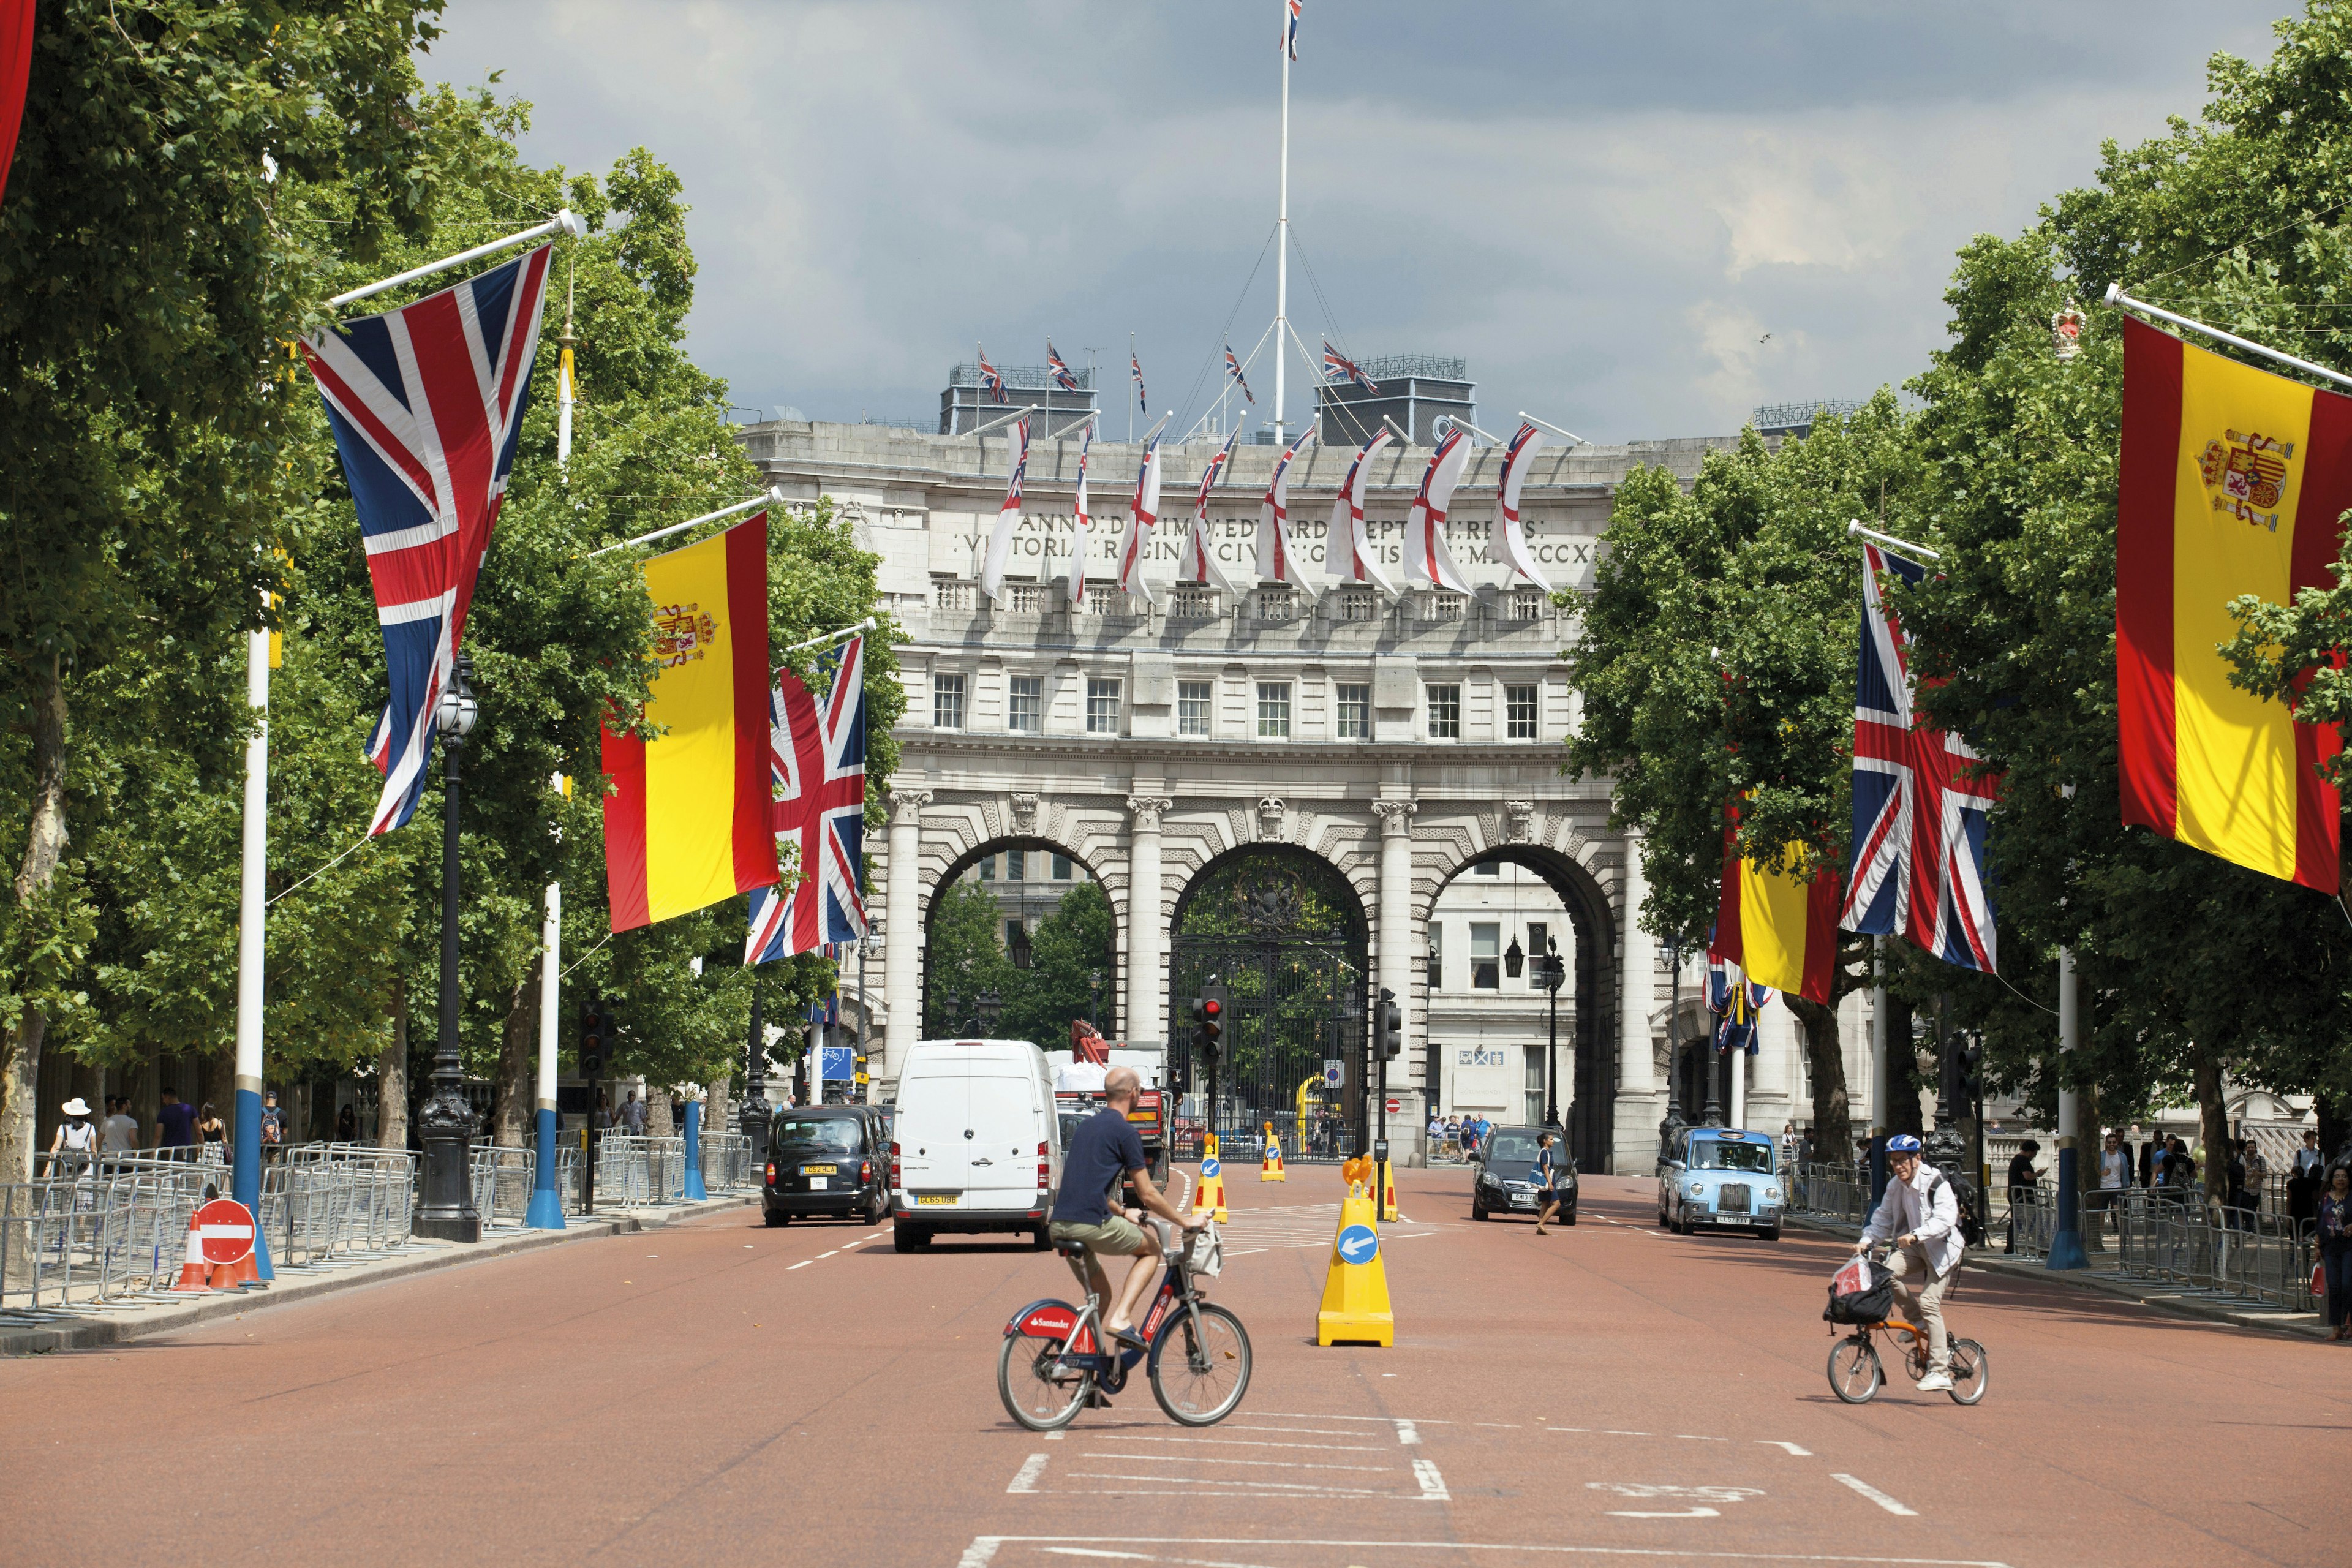 Flags are suspended near Admiralty Arch, looking toward Trafalgar Square.